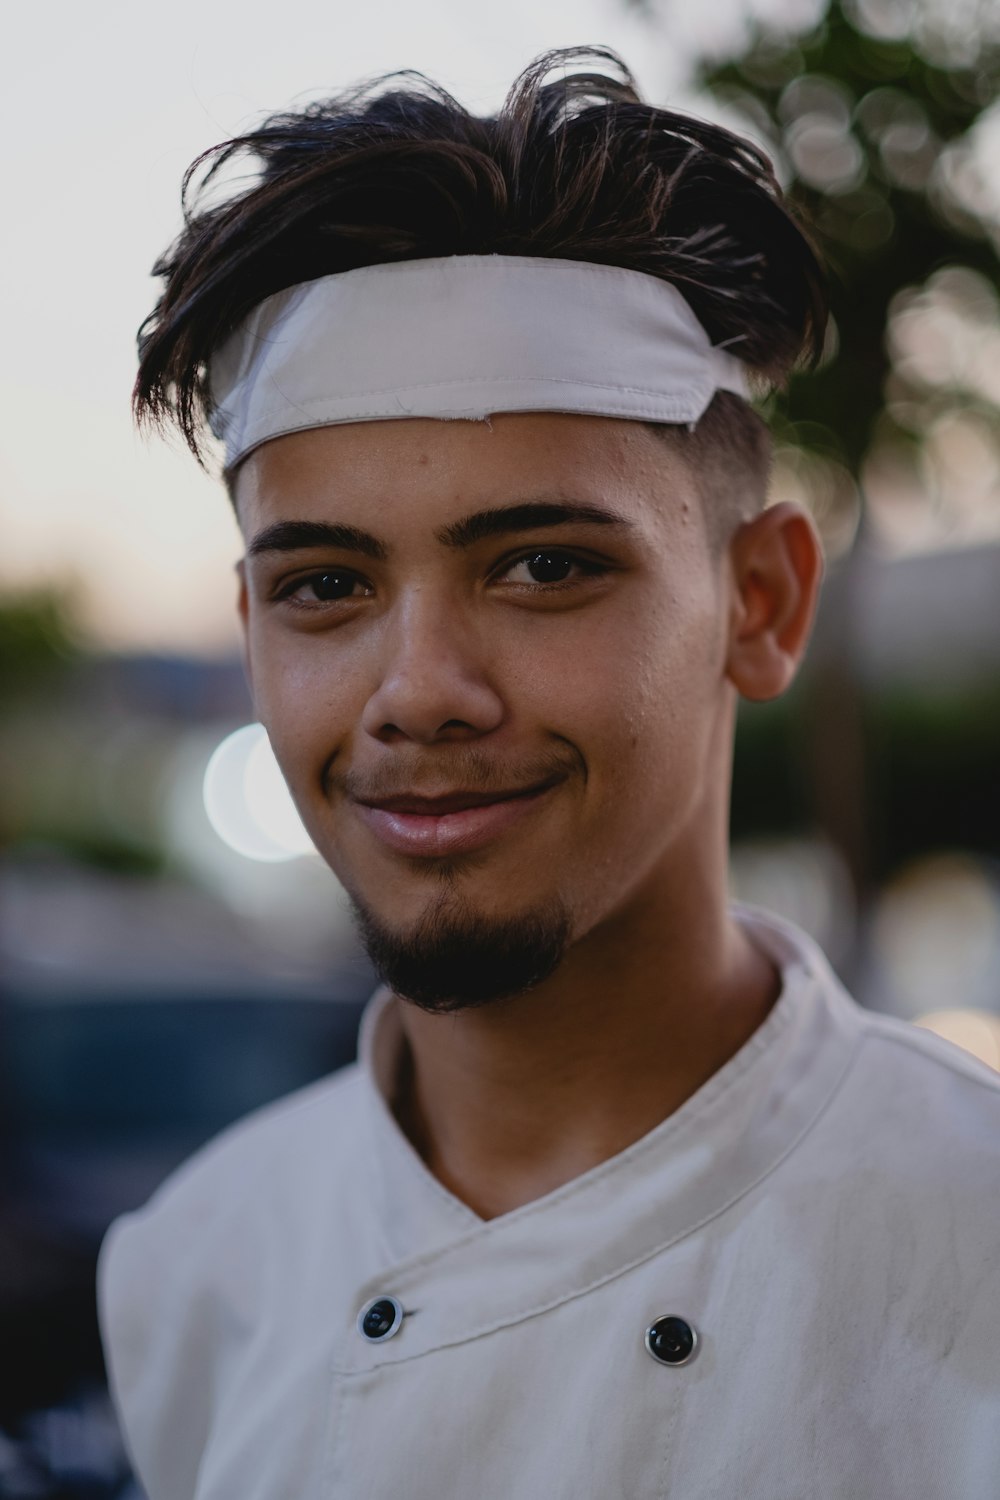 a man with a headband on smiling at the camera